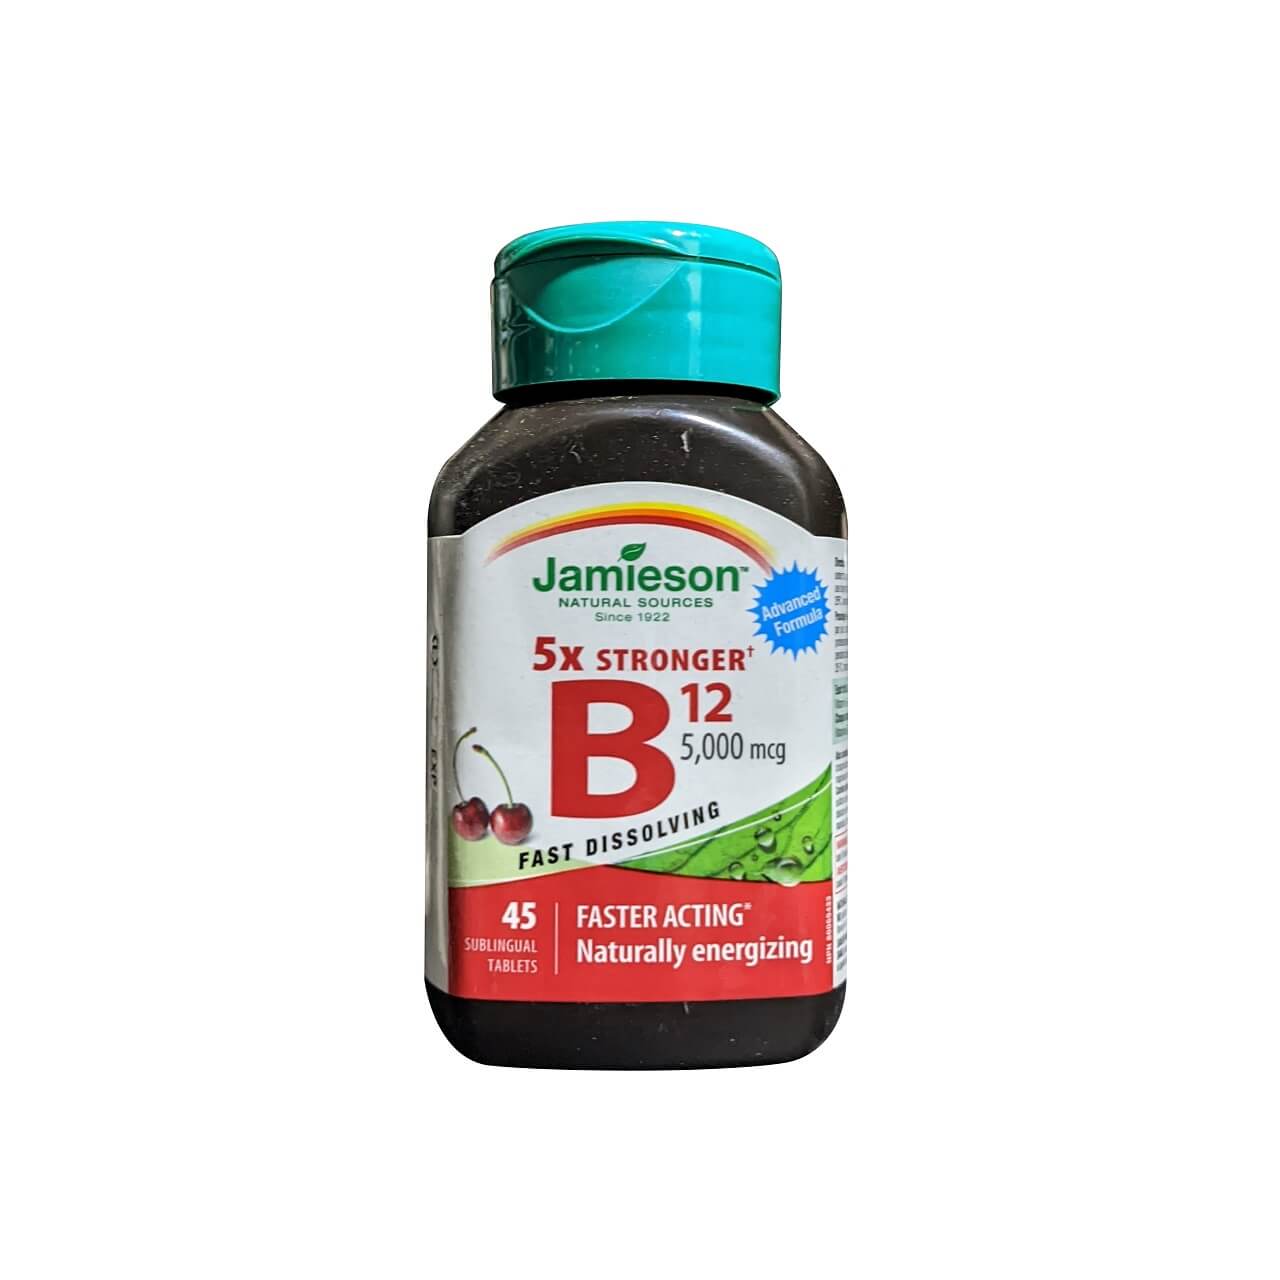 Product label for Jamieson B12 5000 mcg Fast Dissolving (45 tablets) in English